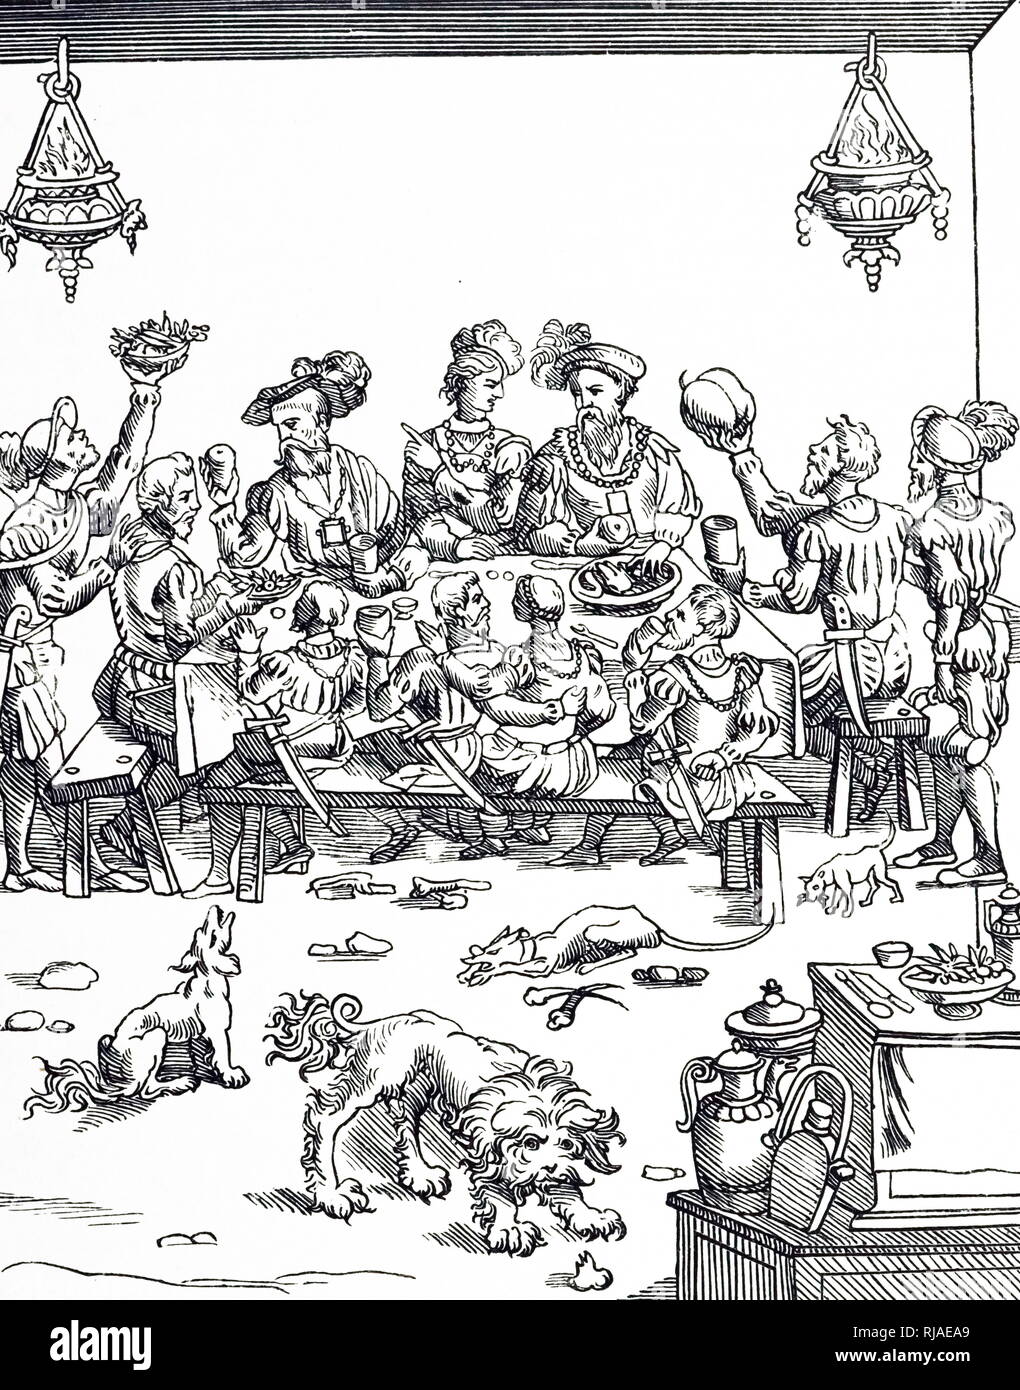 A woodcut engraving depicting a medieval banquet. Dated 16th century Stock Photo